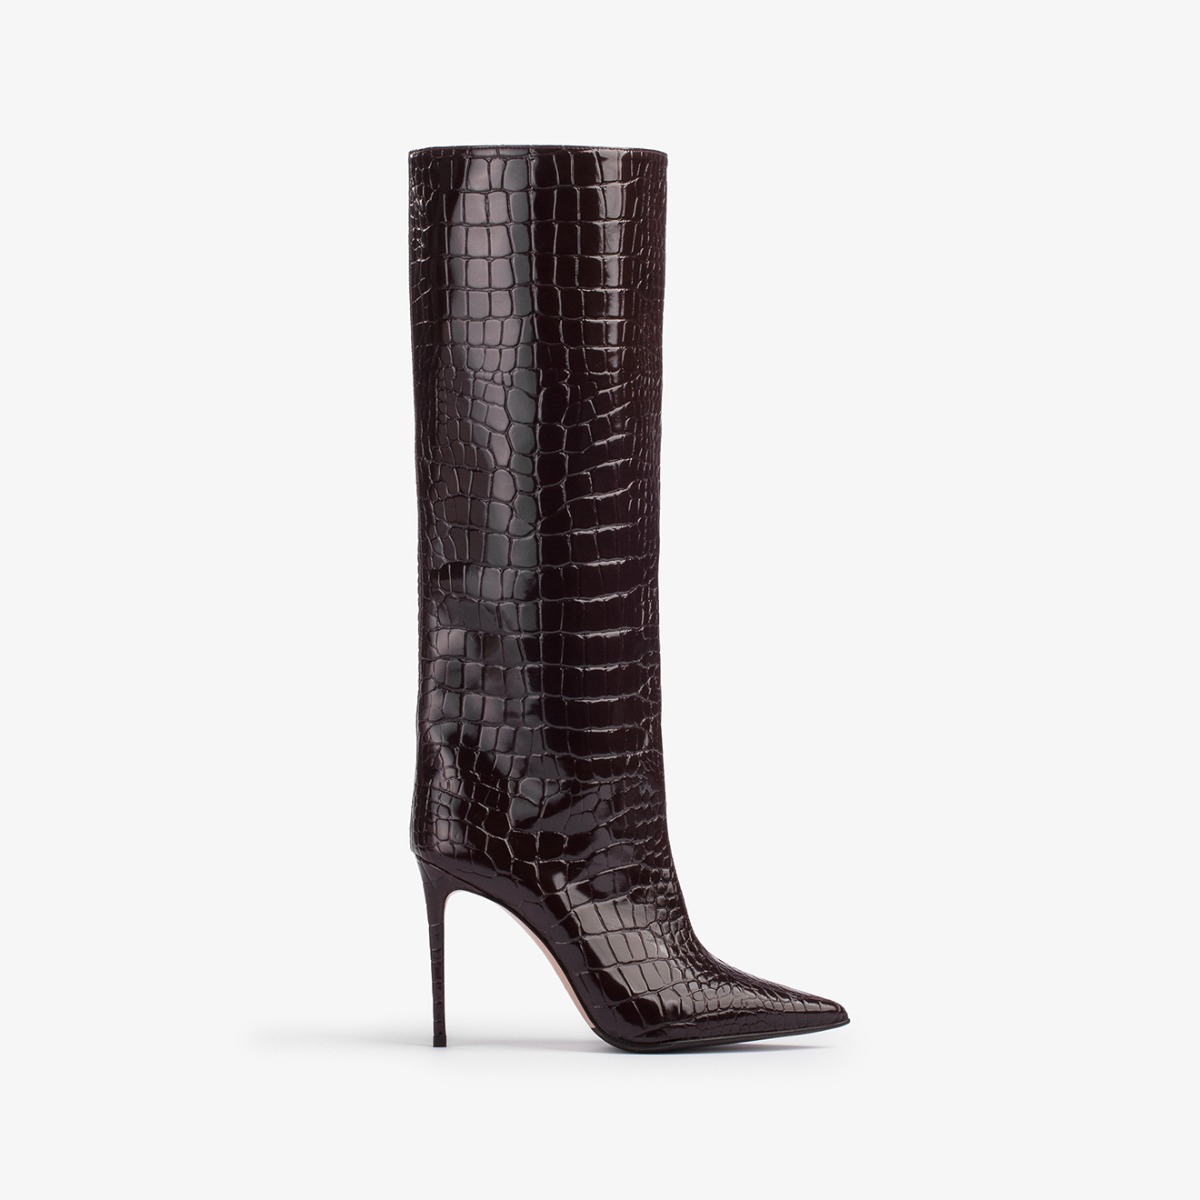 EVA BOOT 100 mm - Le Silla | Official Online Store